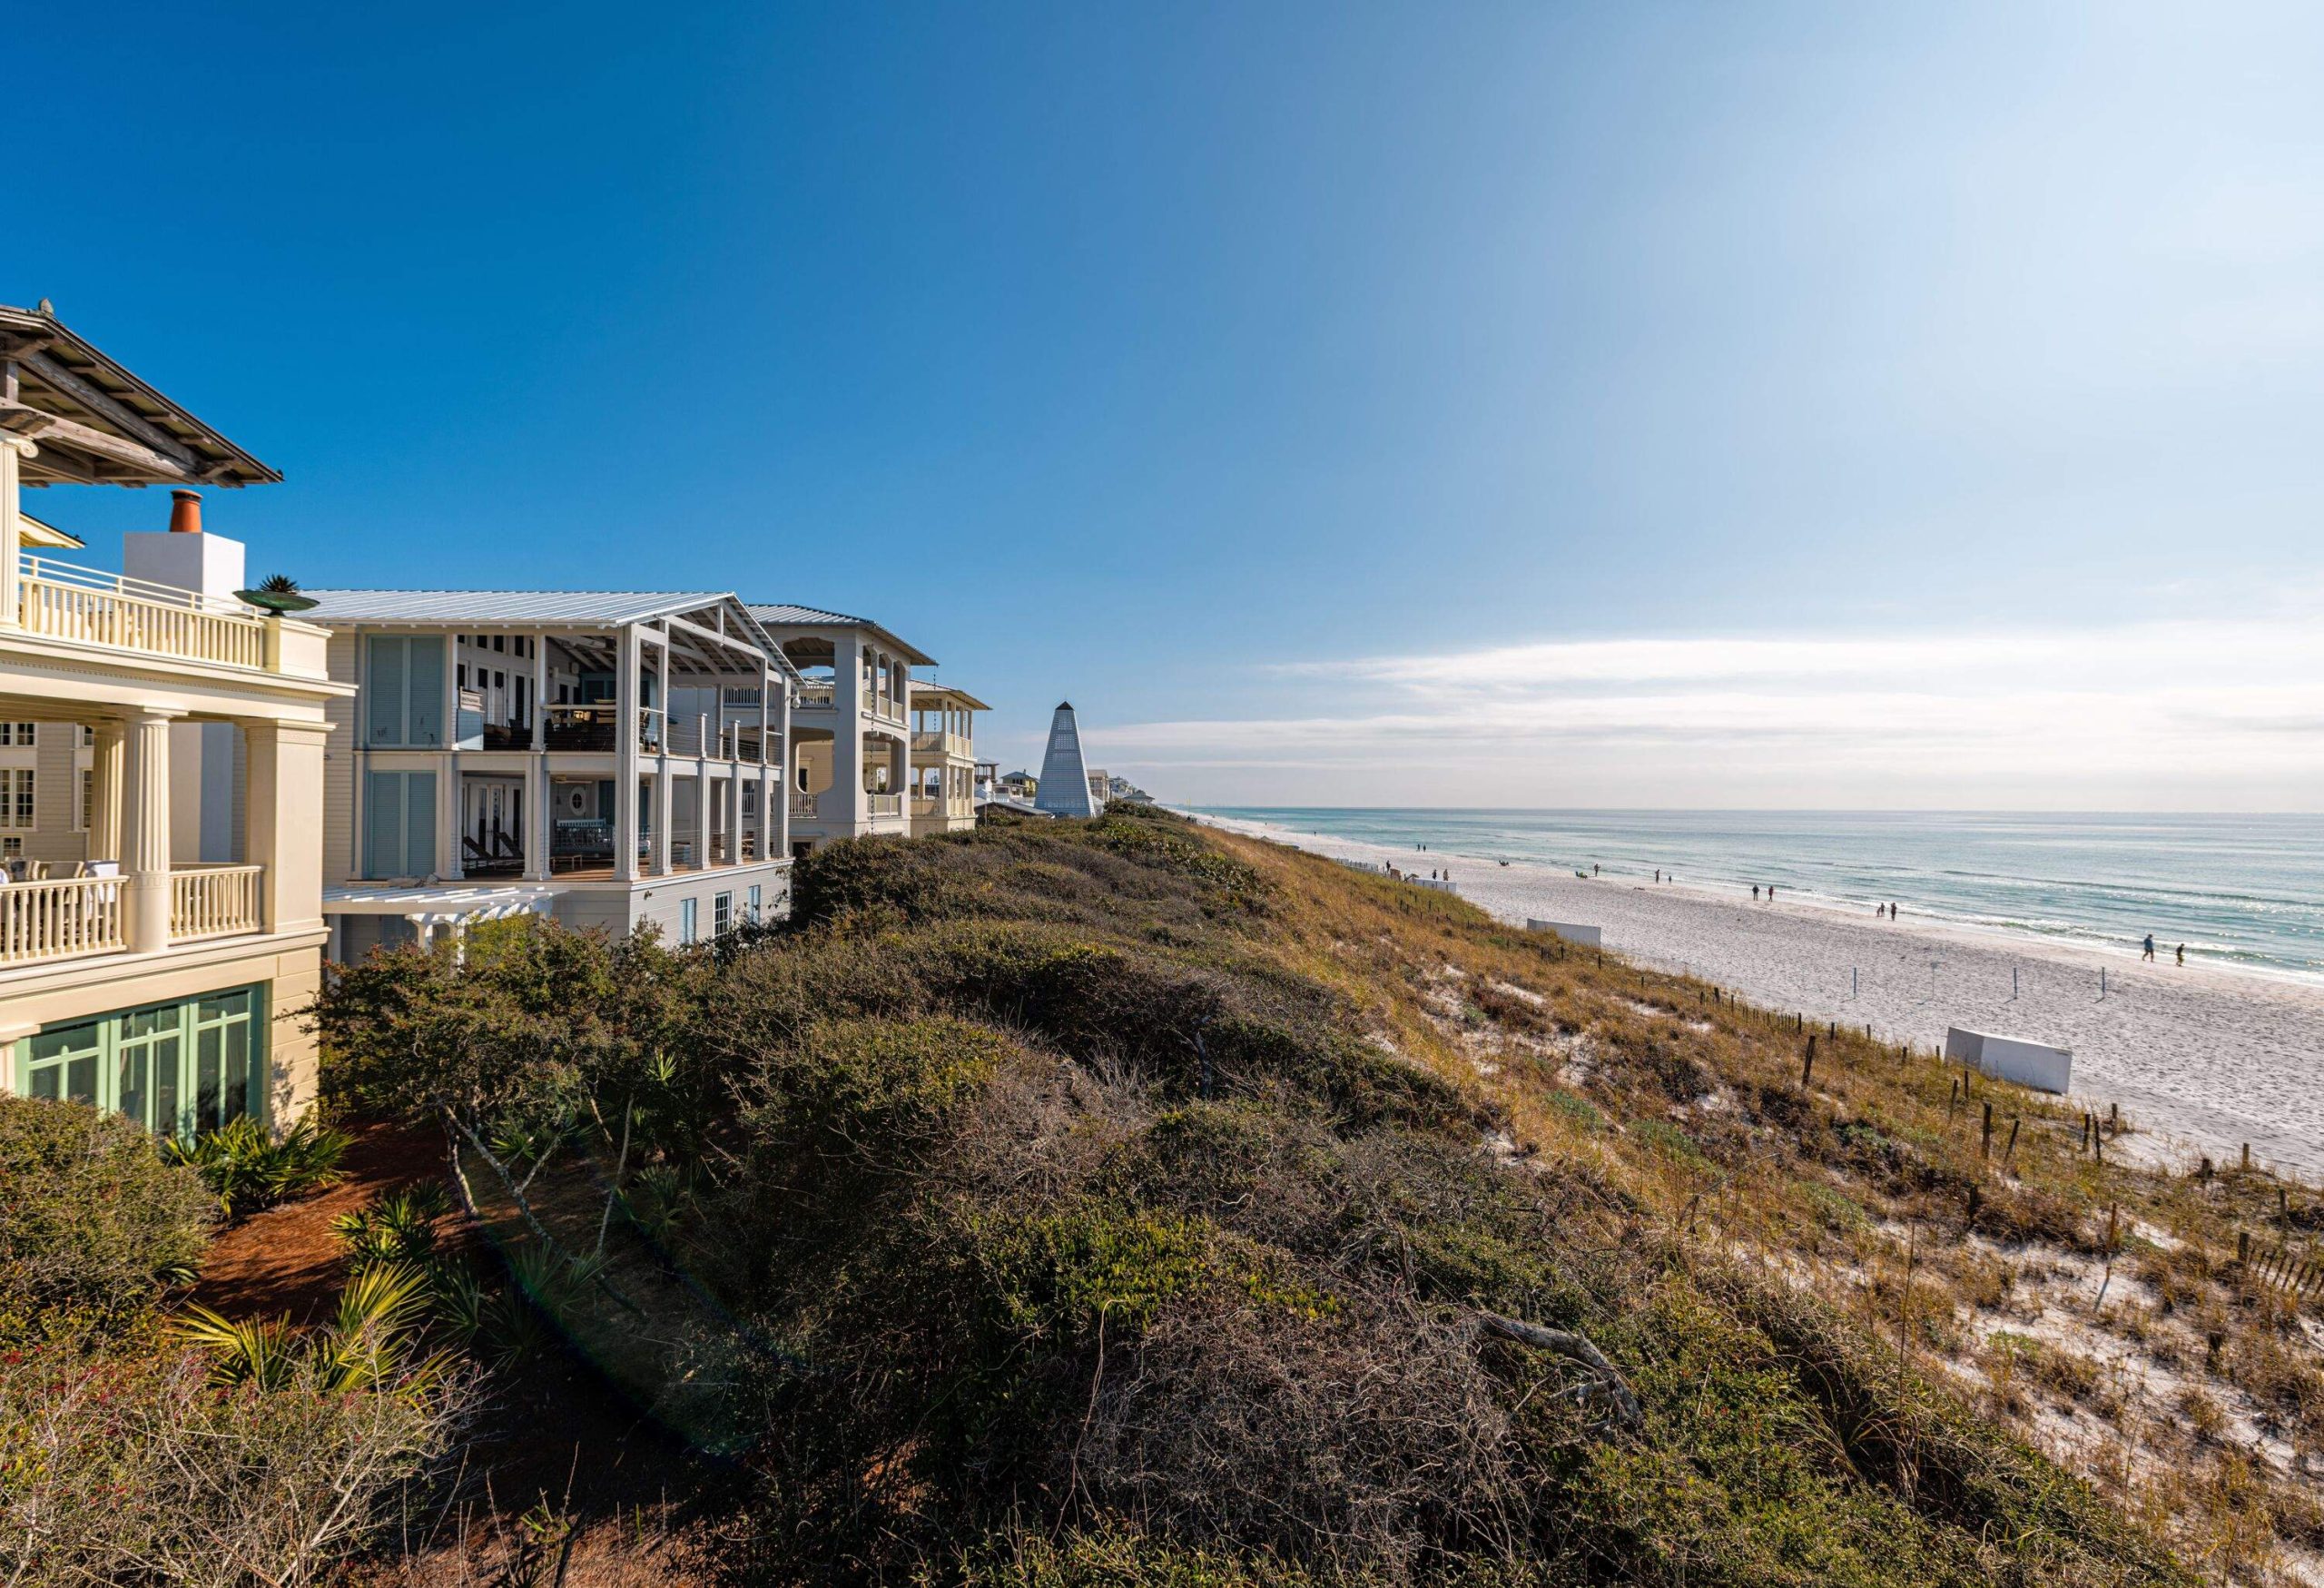 High angle view from wooden pavilion gazebo by beach at Gulf of Mexico at Seaside, Florida by new urbanism rental house home architecture with people walking on ocean sea coast